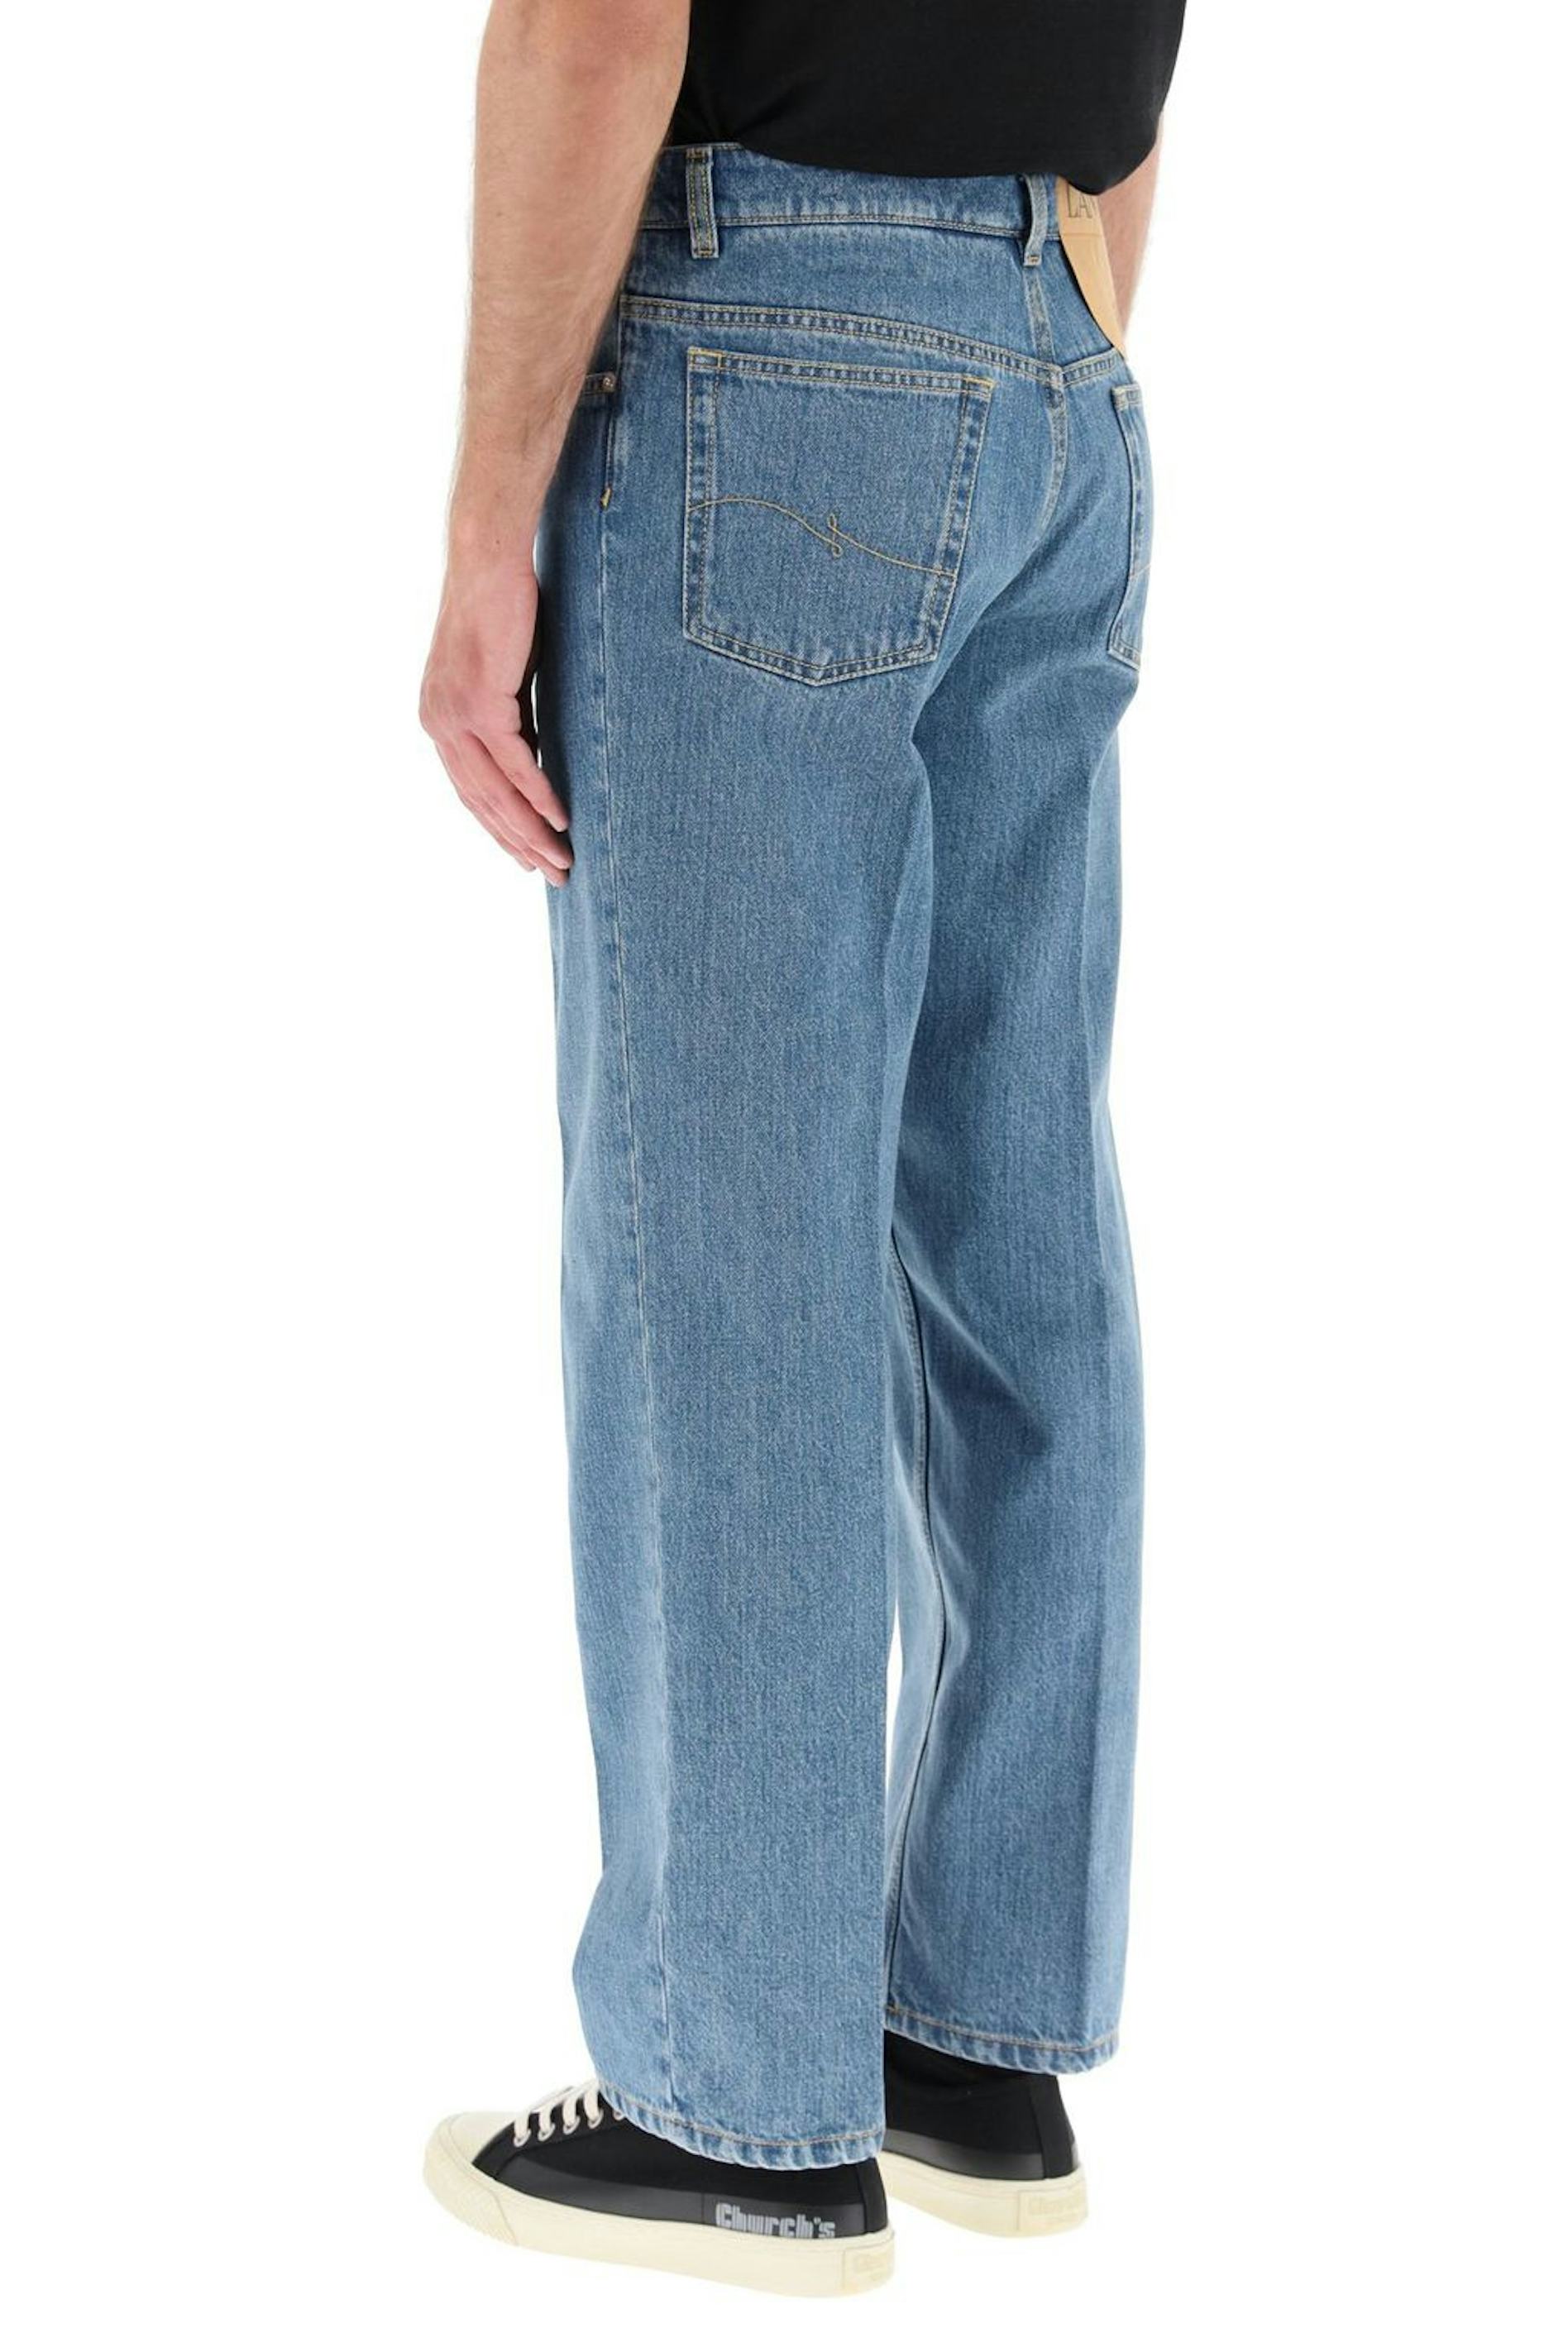 Lanvin Jeans With Crease